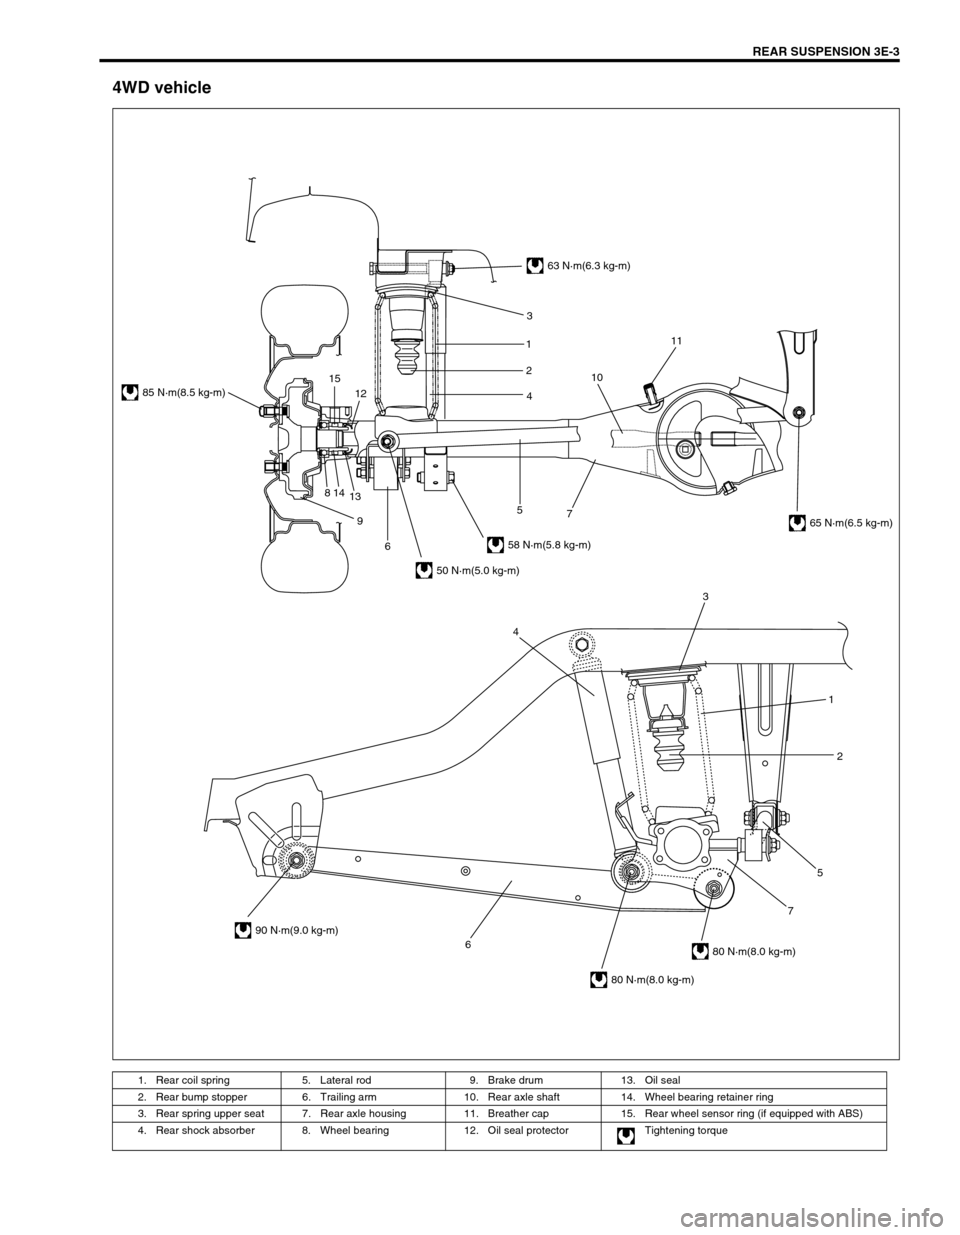 SUZUKI SWIFT 2000 1.G RG413 Service Workshop Manual REAR SUSPENSION 3E-3
4WD vehicle
1. Rear coil spring 5. Lateral rod  9. Brake drum 13. Oil seal
2. Rear bump stopper 6. Trailing arm  10. Rear axle shaft 14. Wheel bearing retainer ring
3. Rear spring